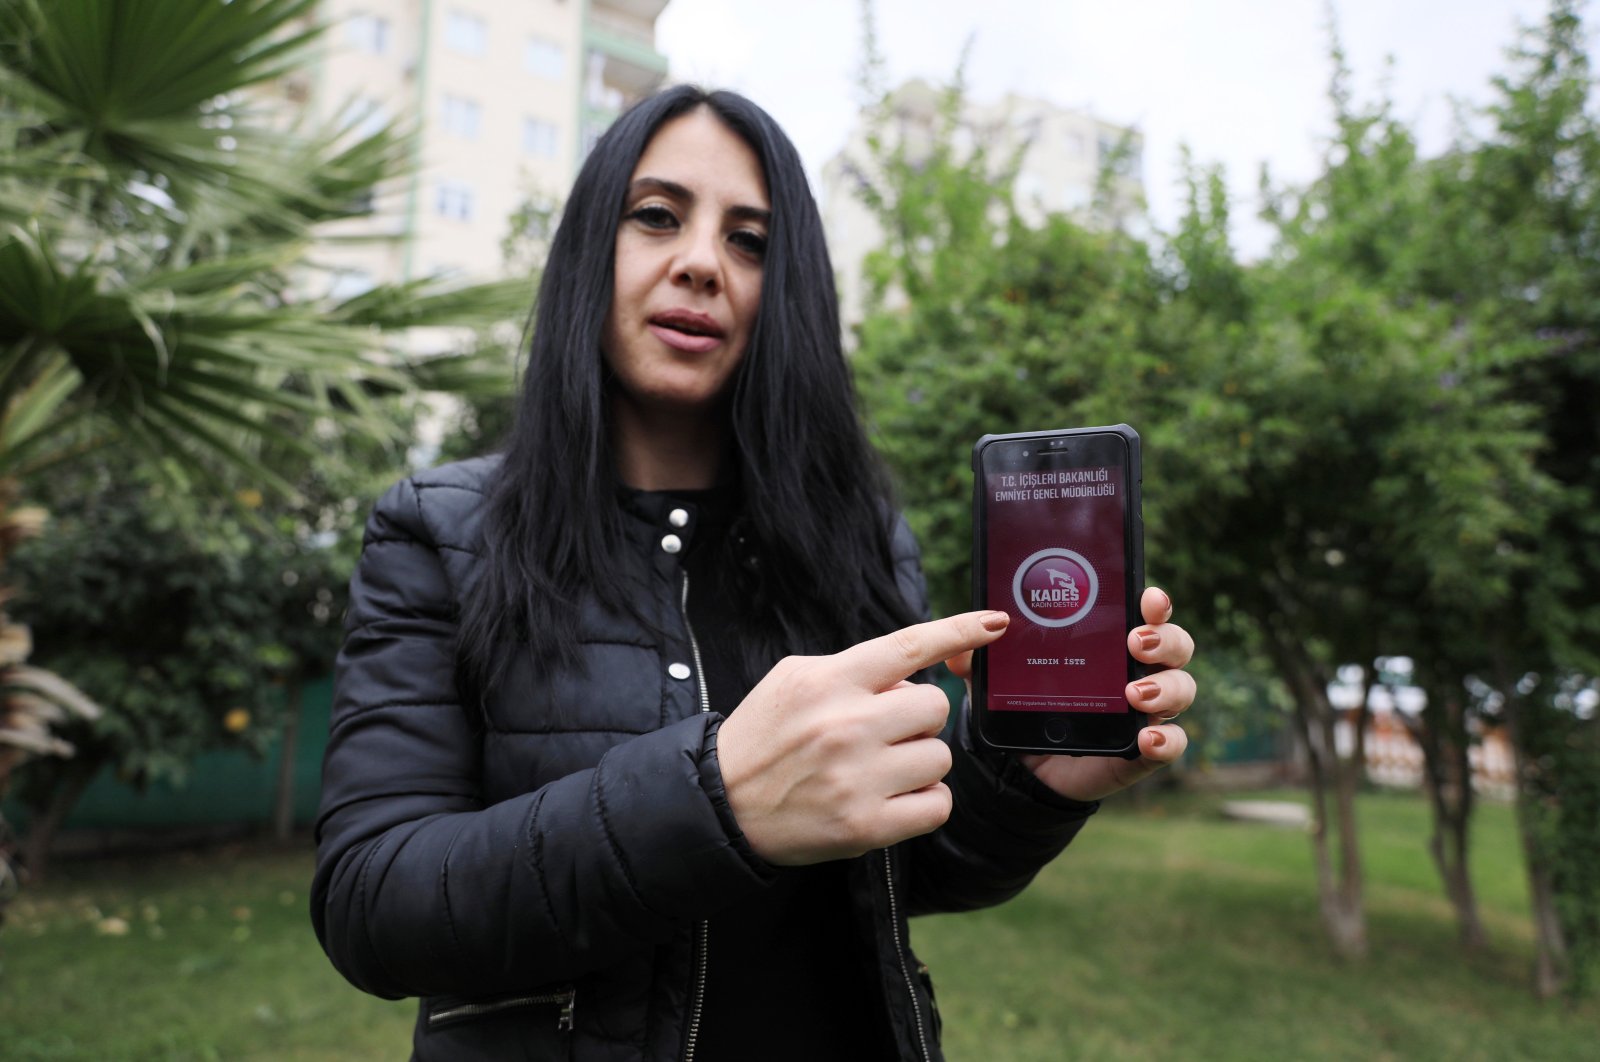 Ayşe Kasanova, who used the app to alert police against her violent ex-husband, shows KADES on her cellphone, in Antalya, southern Turkey, Aug. 11, 2021. (DHA PHOTO) 